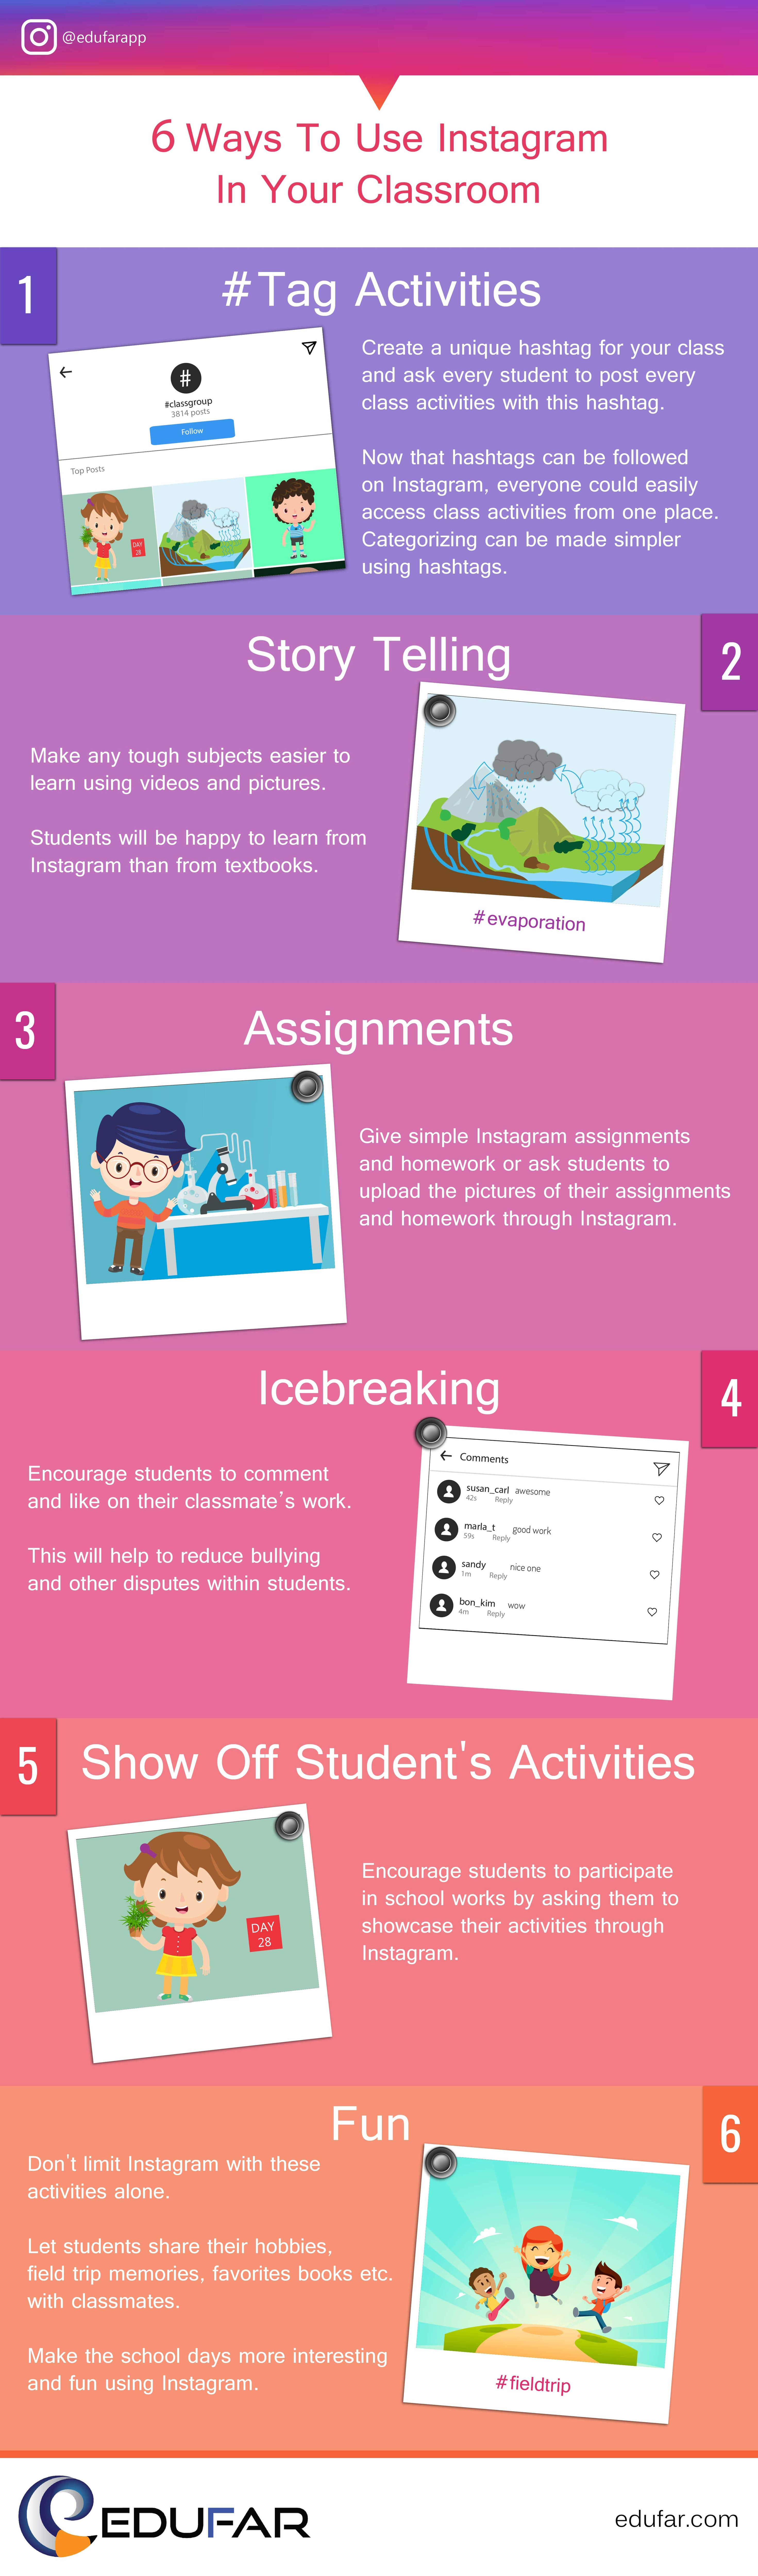 6 Ways to use Instagram in Your Classroom